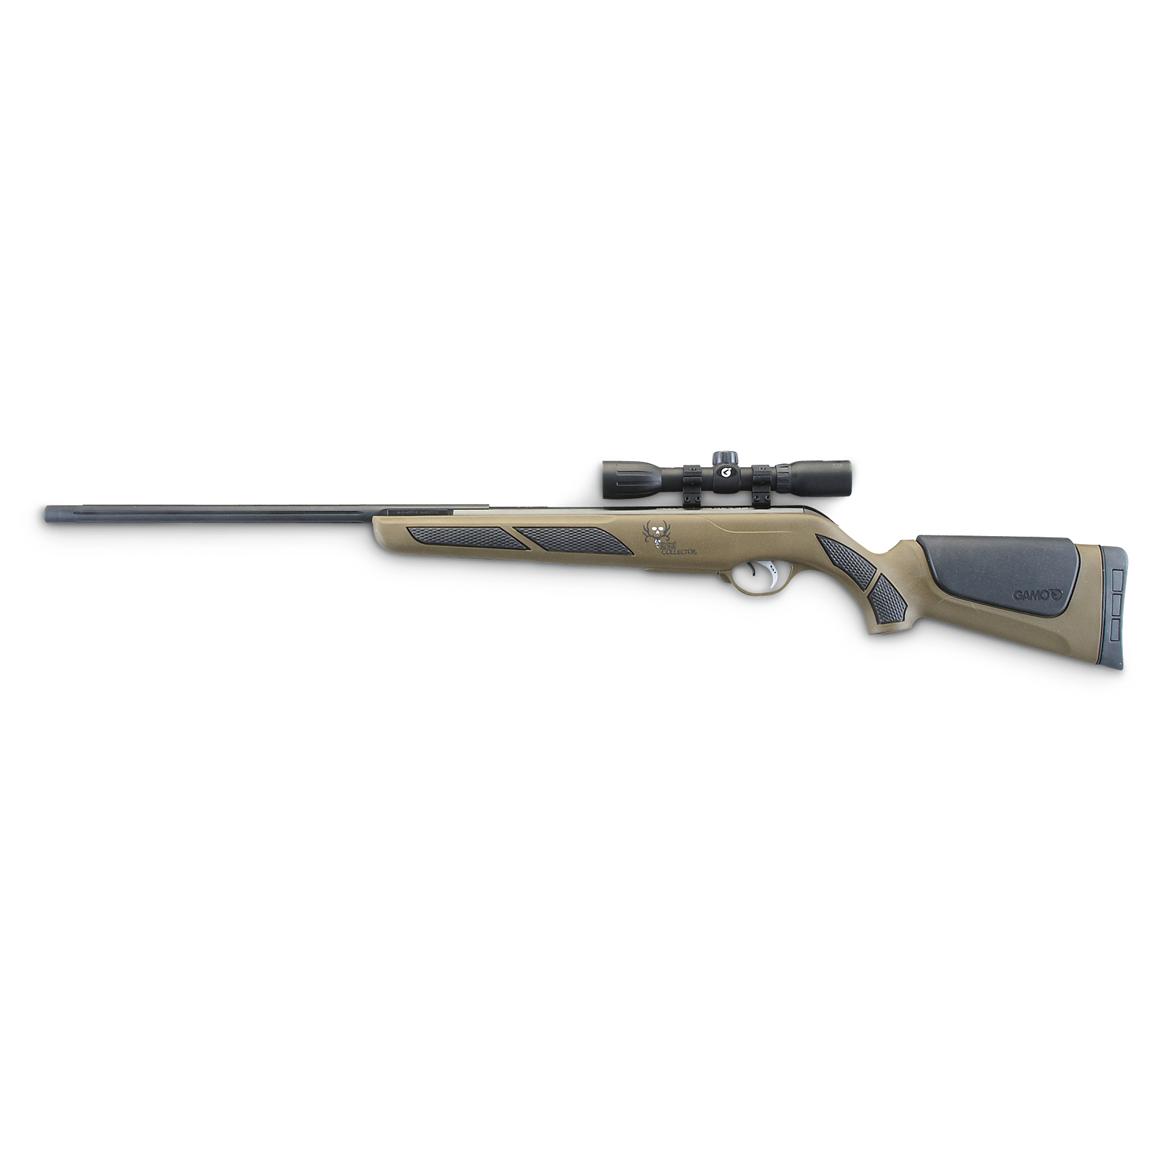 Gamo® Bone Collector™ 177 Cal Air Rifle Scope Reconditioned Like